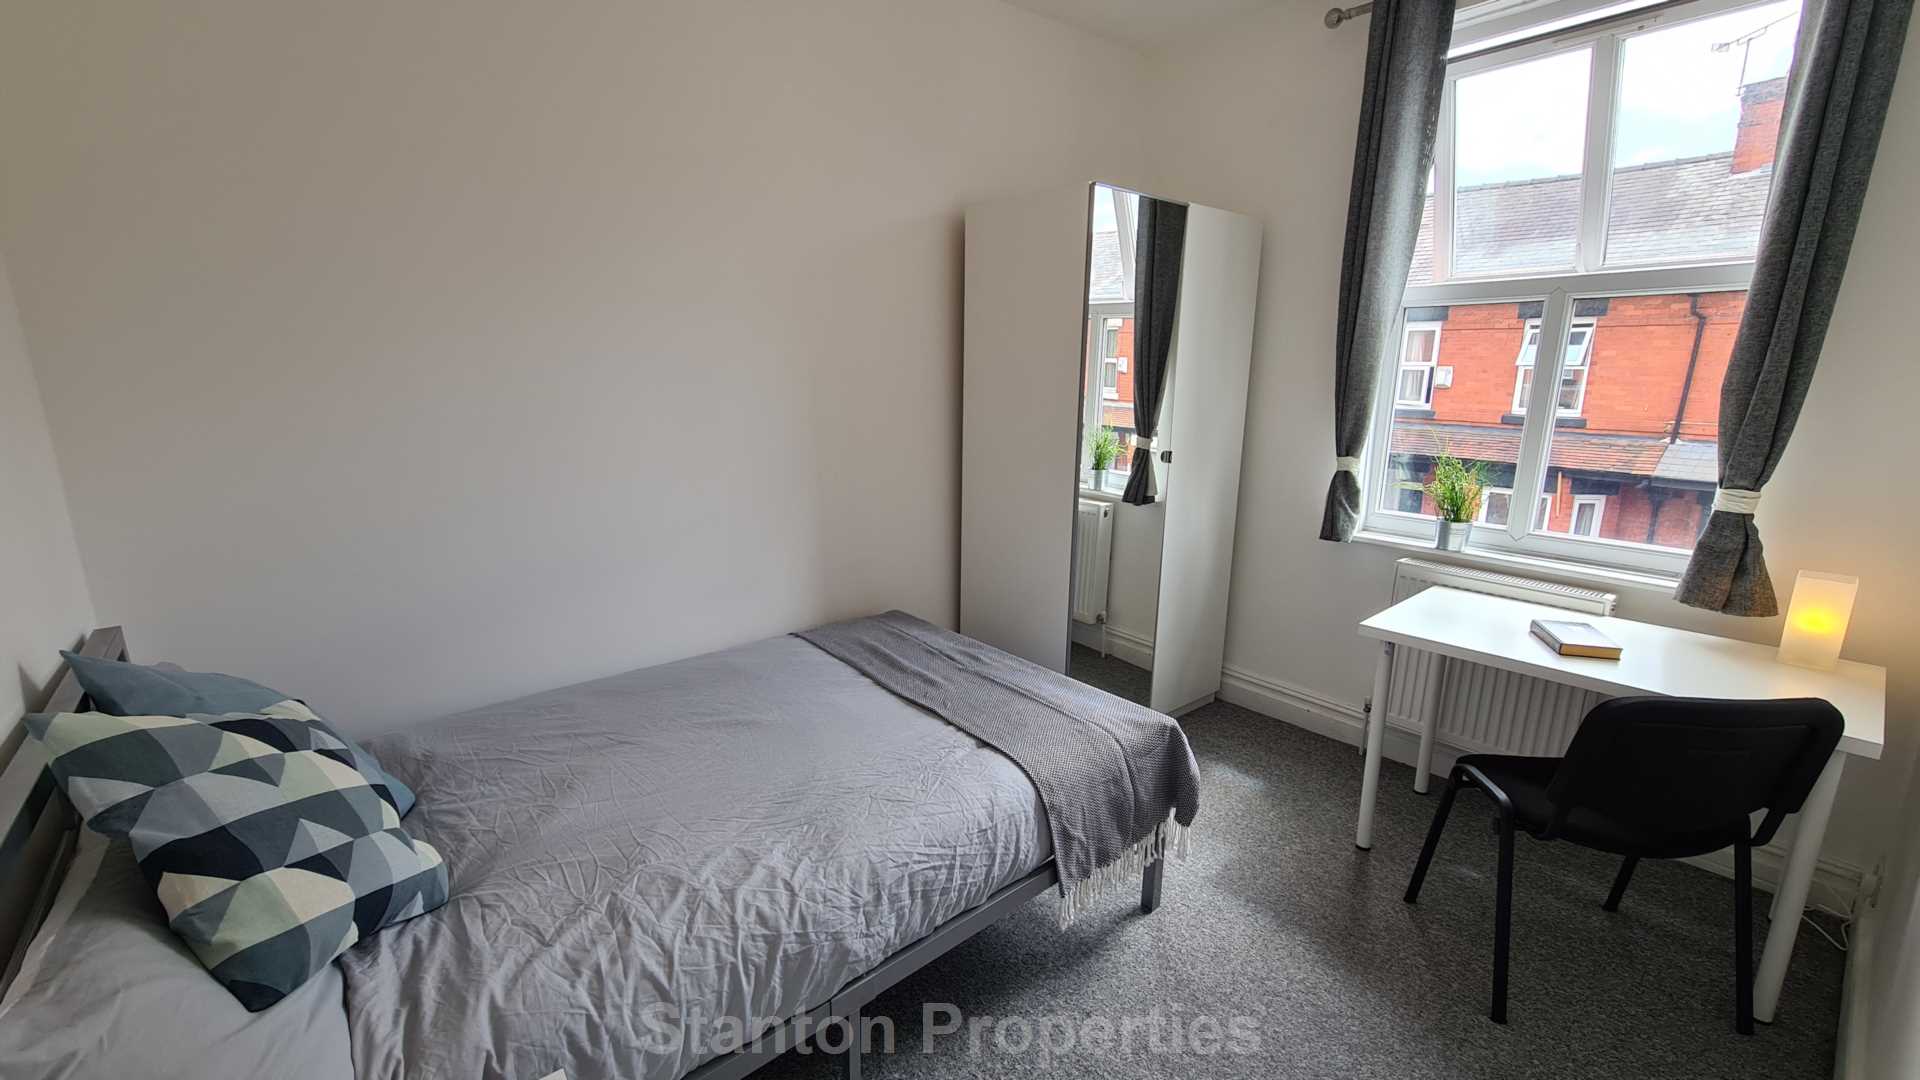 £136 pppw, See Video Tour, Furness Road, Fallowfield, Image 8